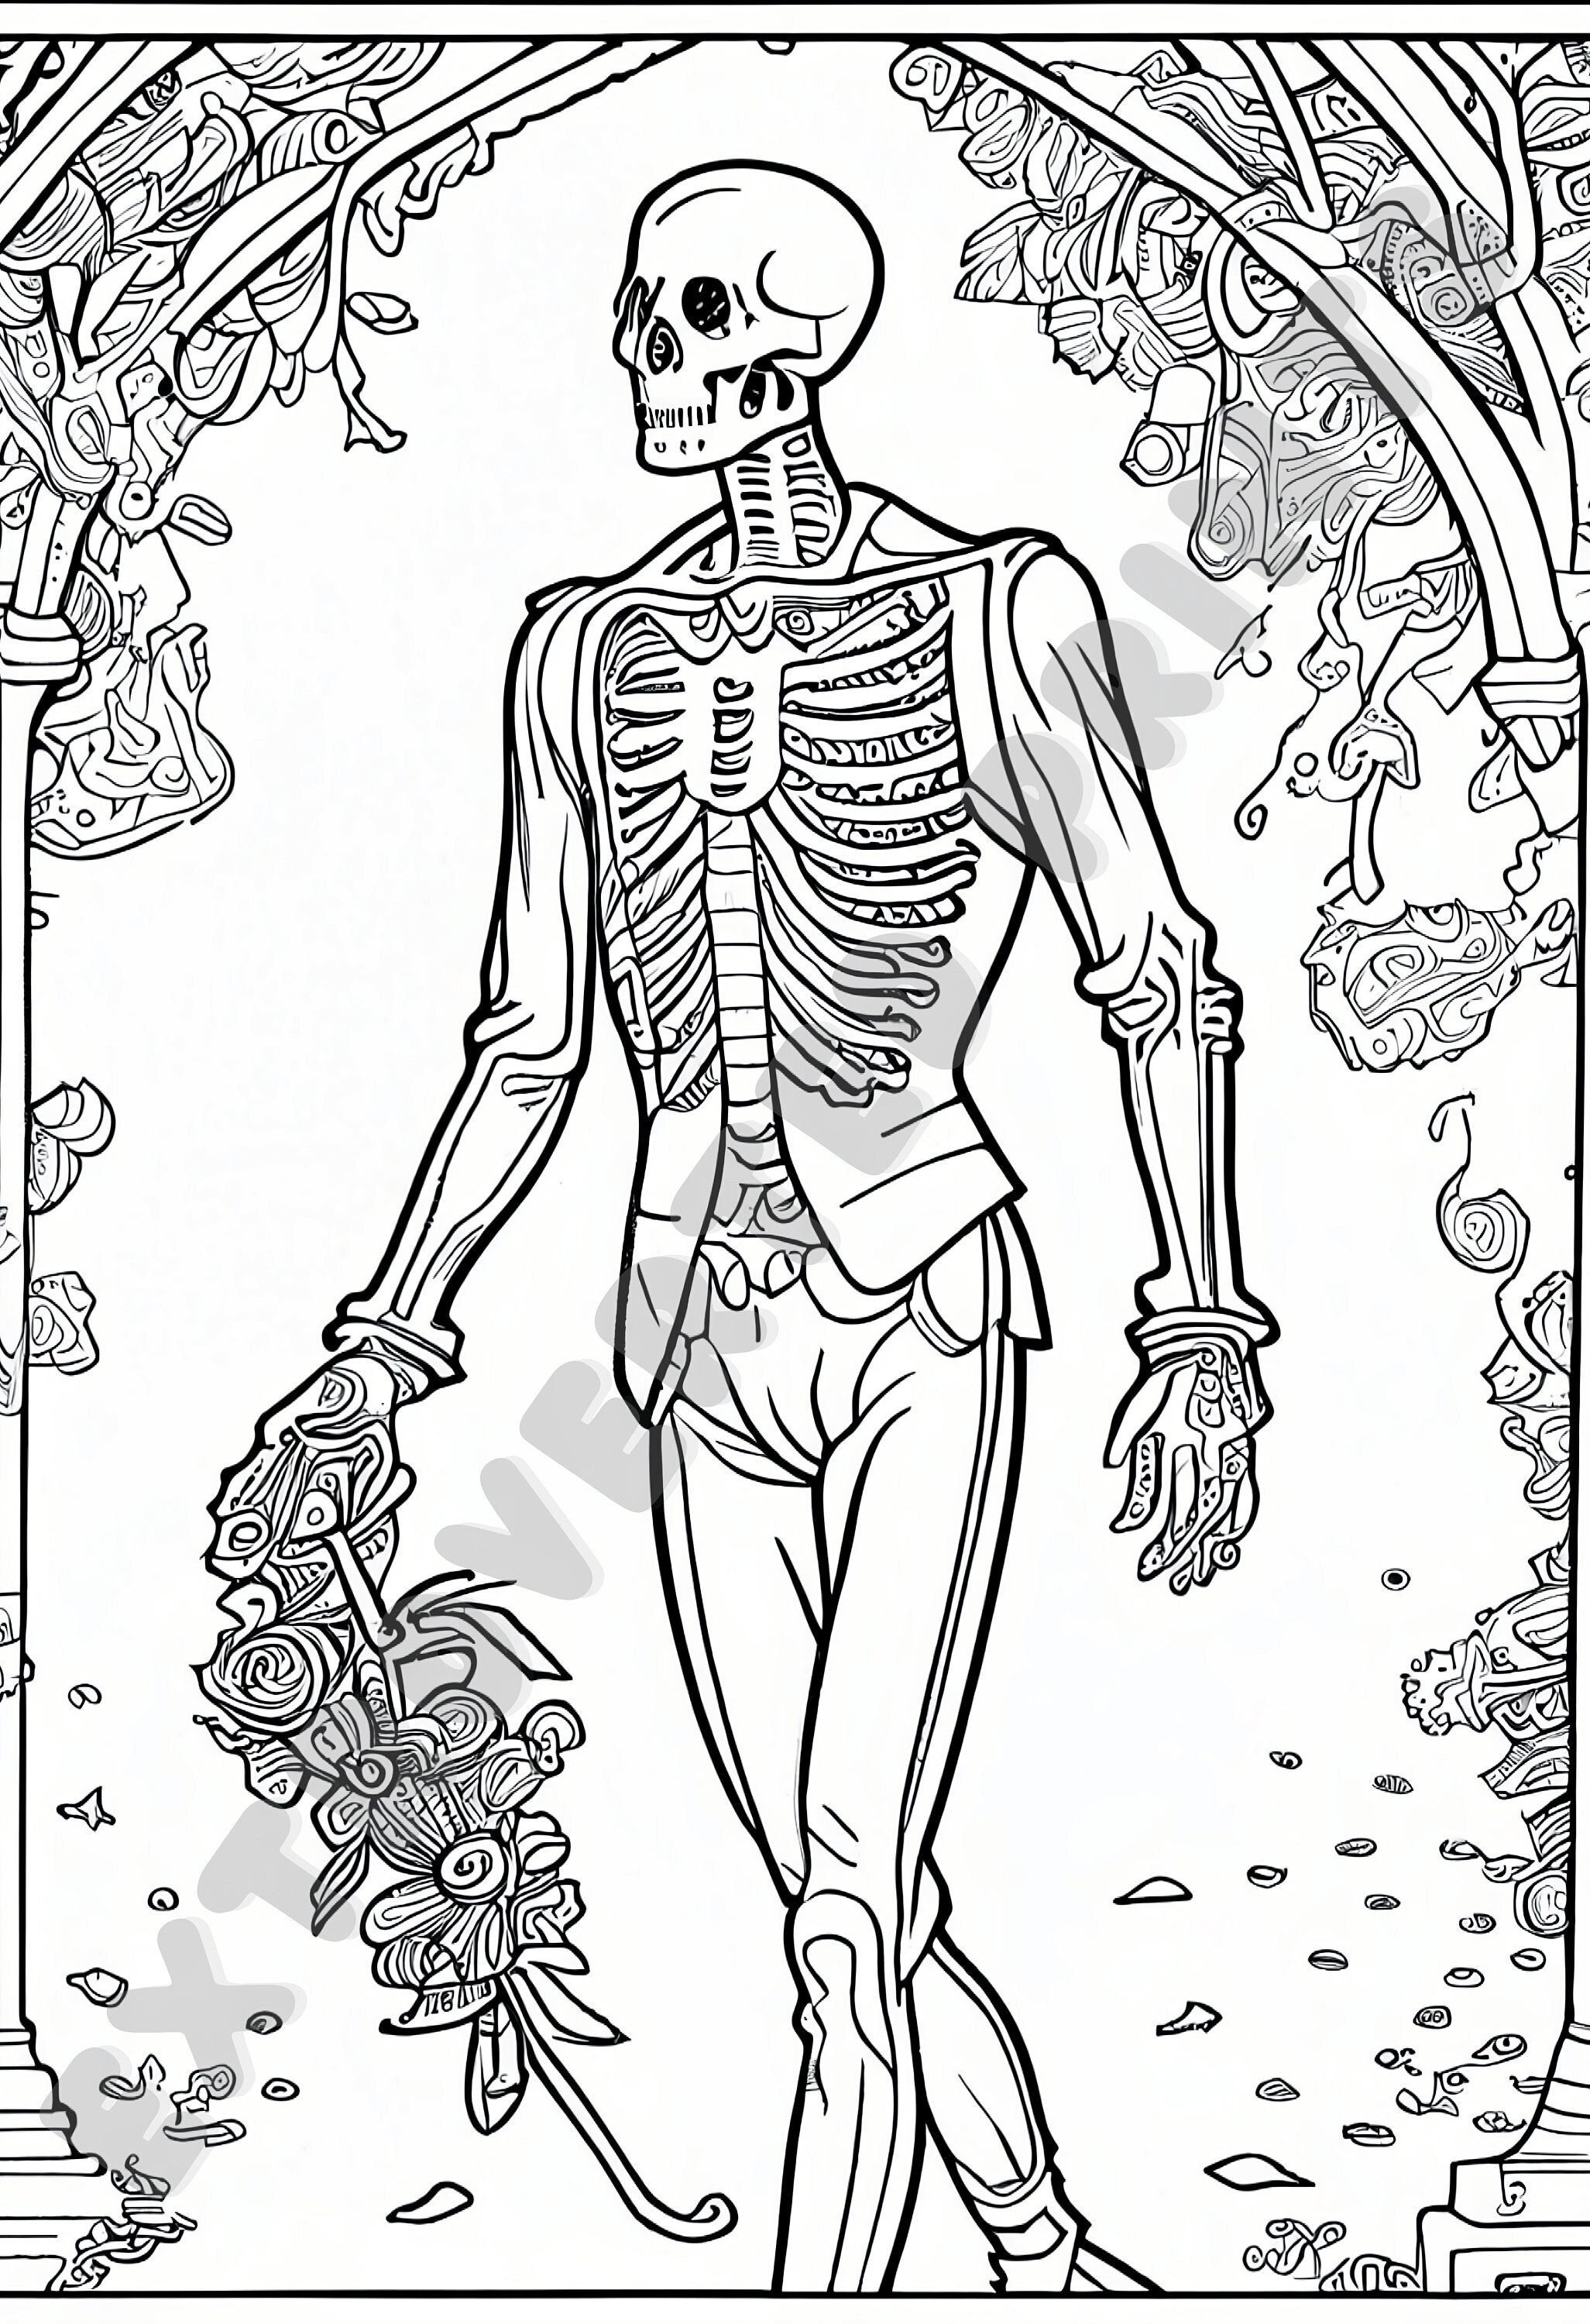 Jack skellington coloring page for kids and adults who experience adhd anxiety relaxin meditation instant digital download pdf file